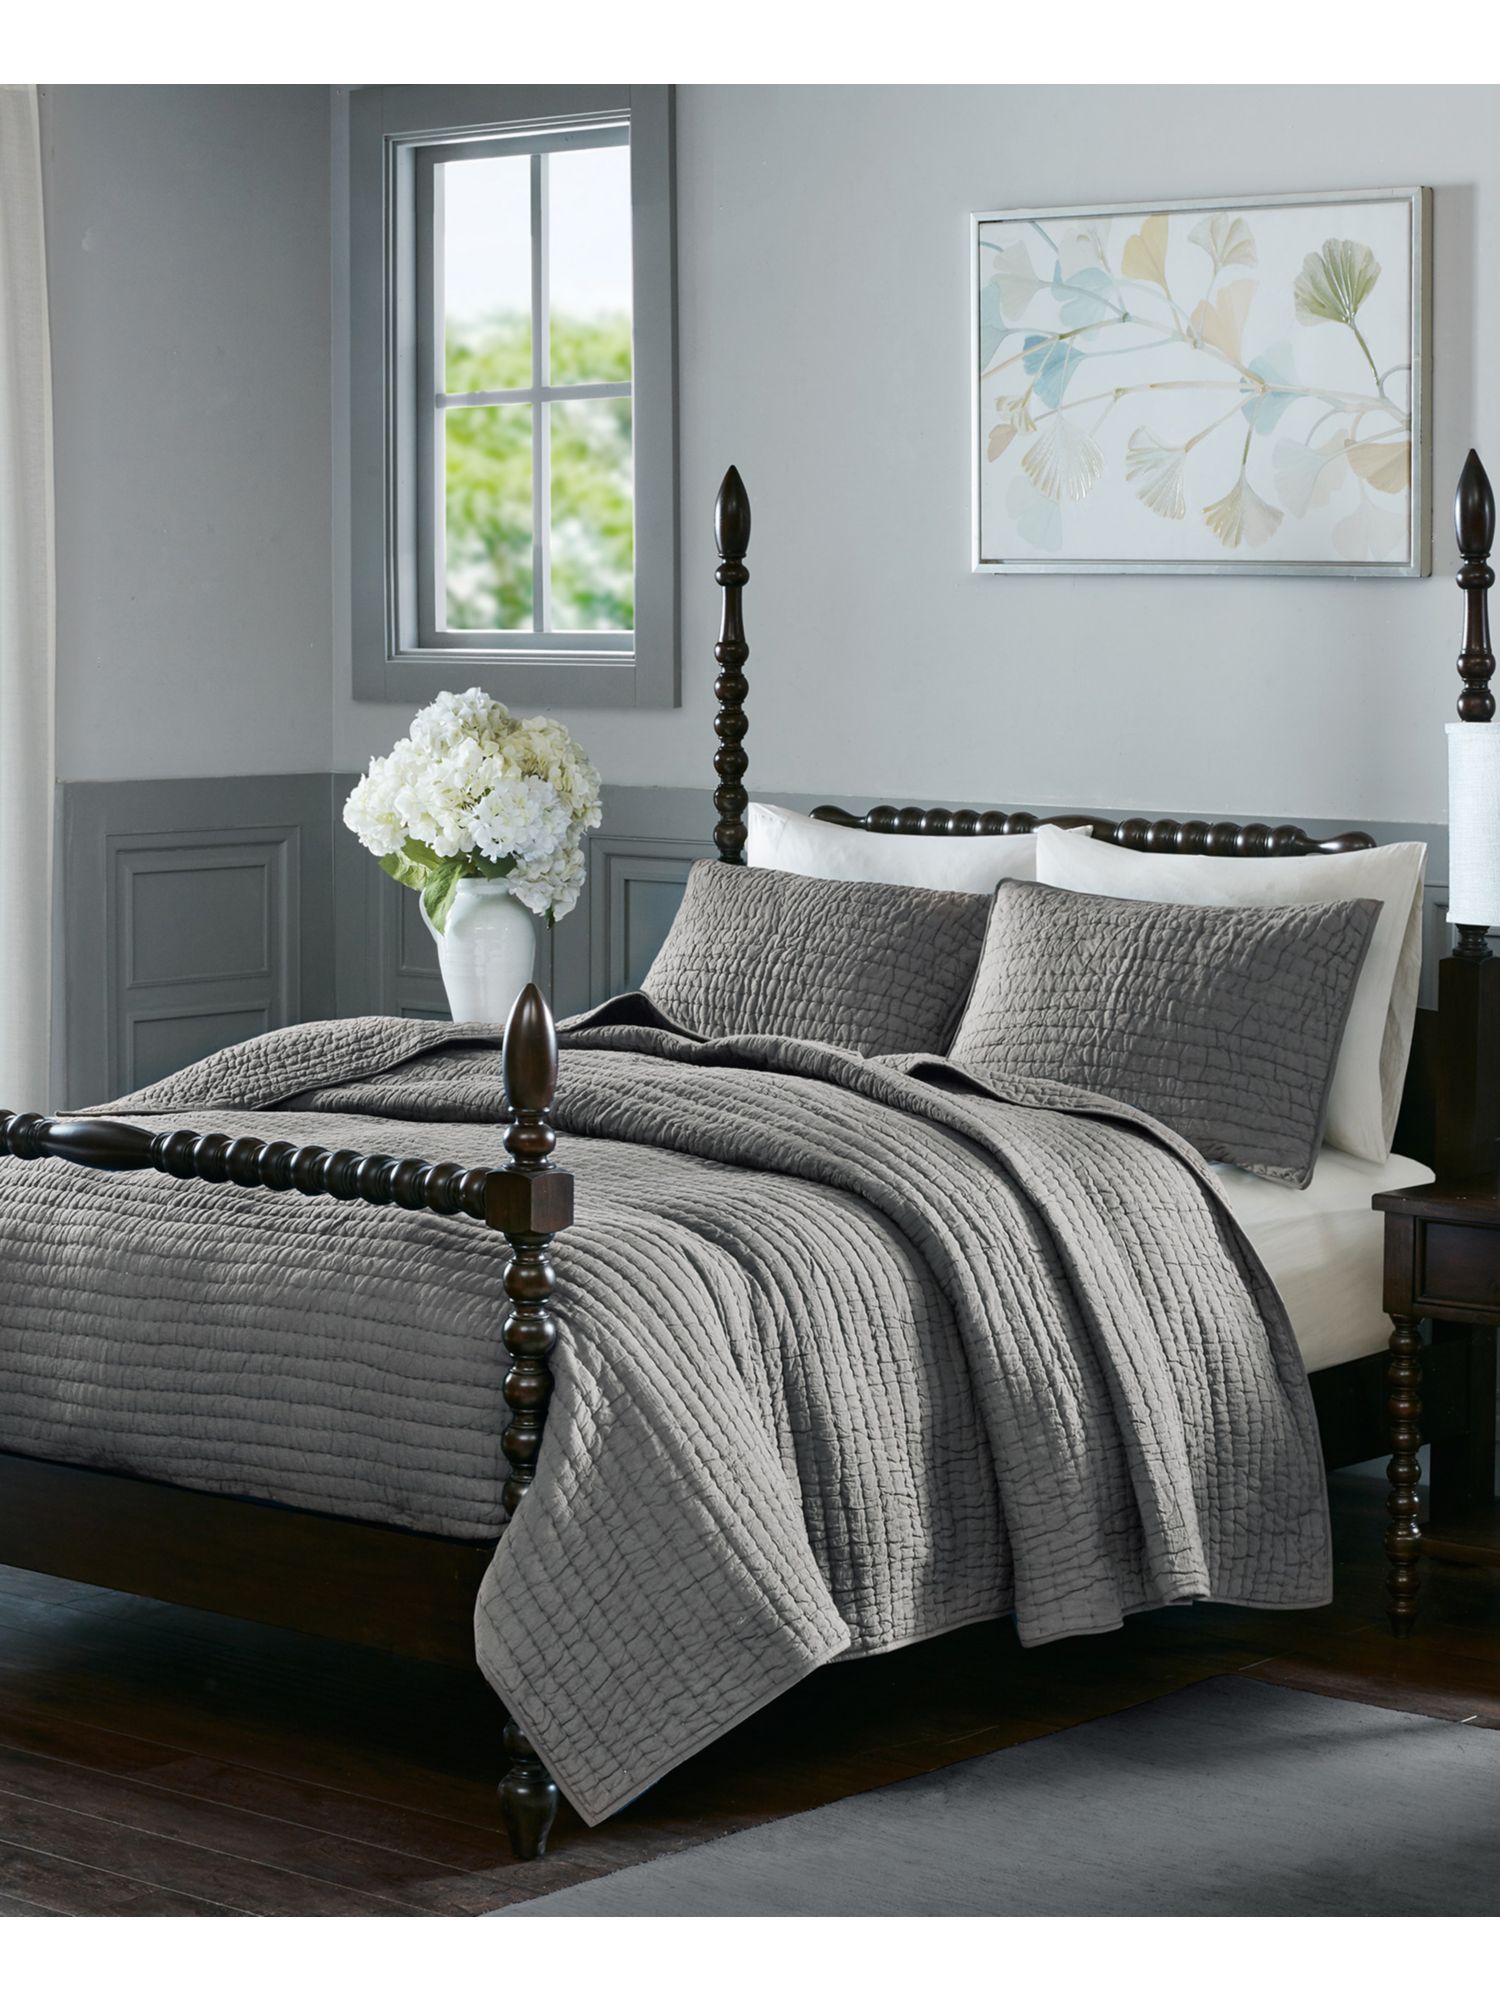 SIGNATURE MADISON PARK Oversized Gray Solid Quilted All Seasons KING Bed Set